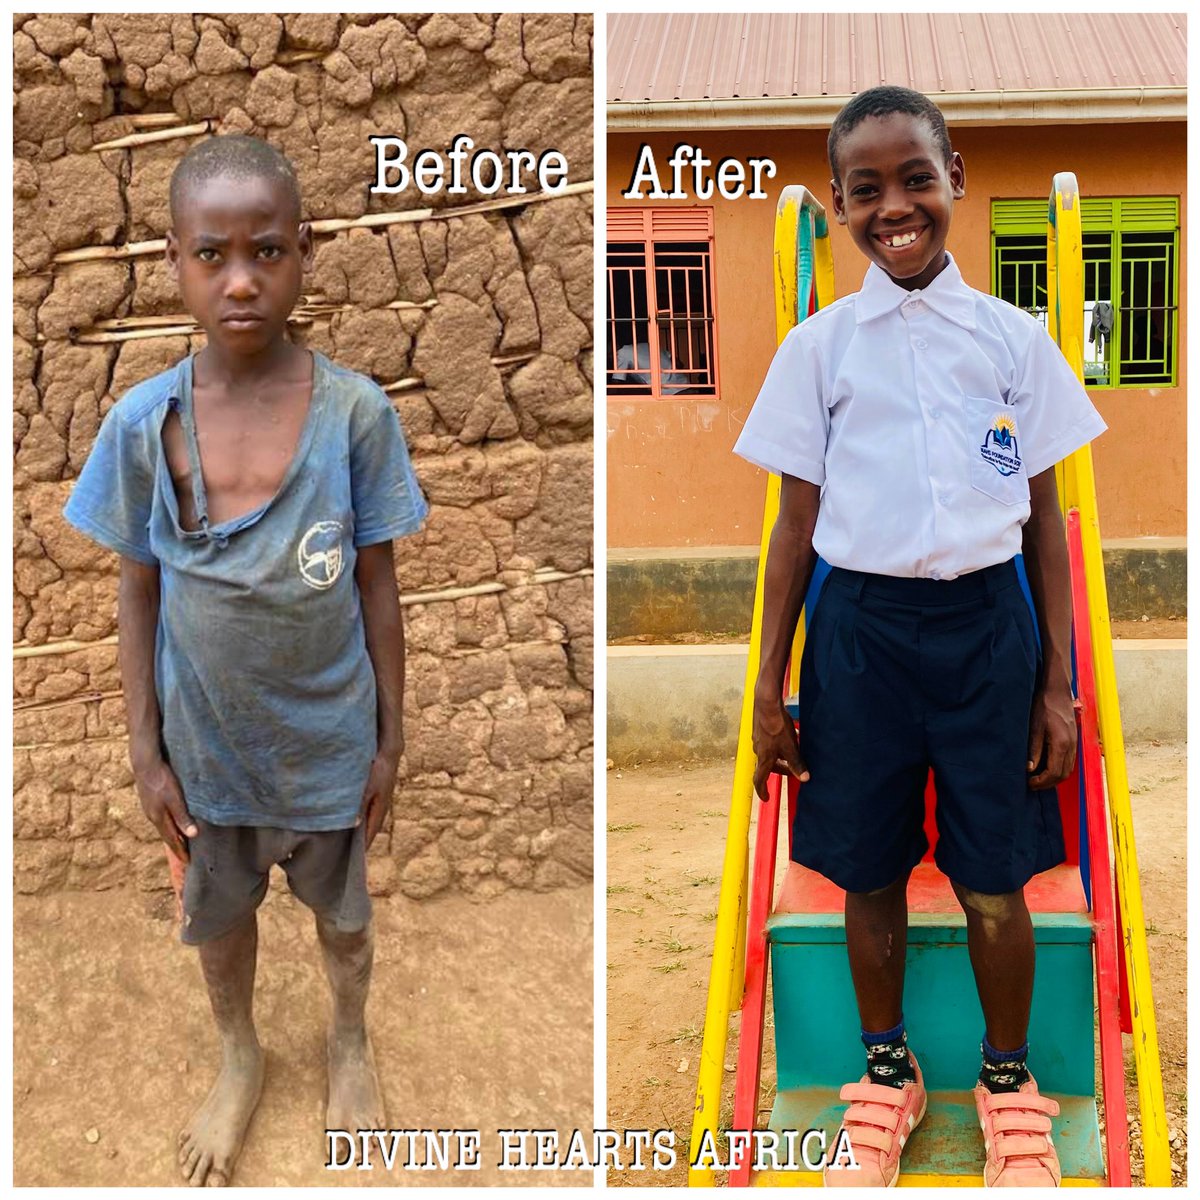 Vincent was a vulnerable little boy who had little hope for the future until he was sponsored. Now, he's in school and thriving. He is so happy and growing into a very confident boy that can express himself before people. #charitywork  #futurelearders #volunteeropportunities